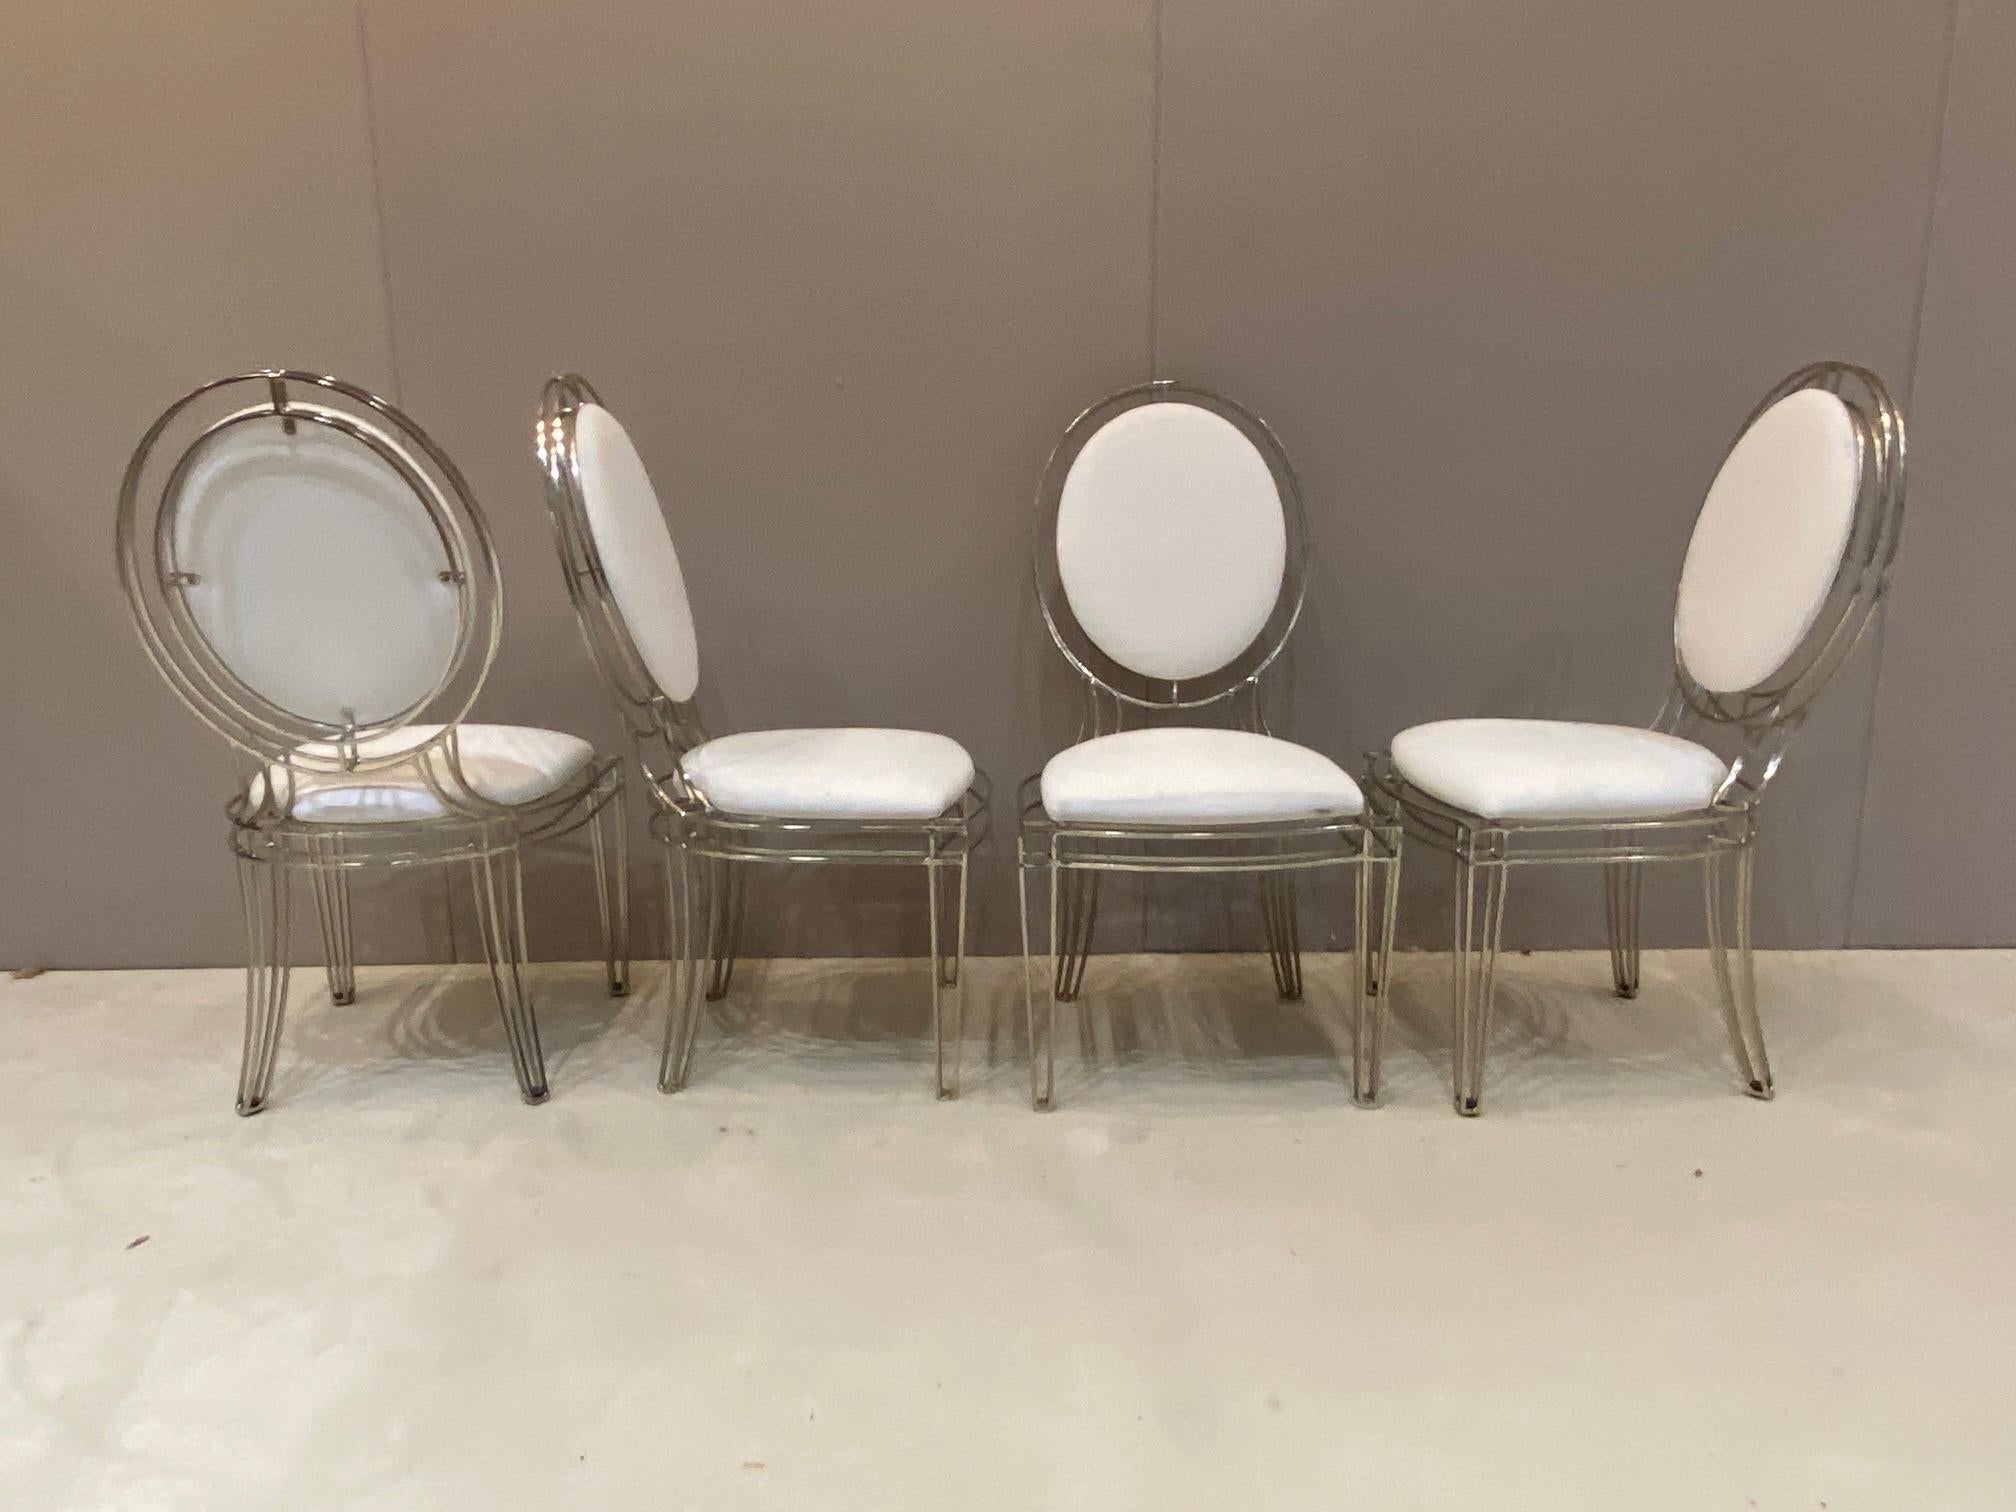 22 Of these chairs are available. They are nickel plated steel in good condition. The nickel plating on these chairs is done superbly. The construction is first class. Chair height 39 inches, widest point is seat 19.75 inches, seat height 18 inches,